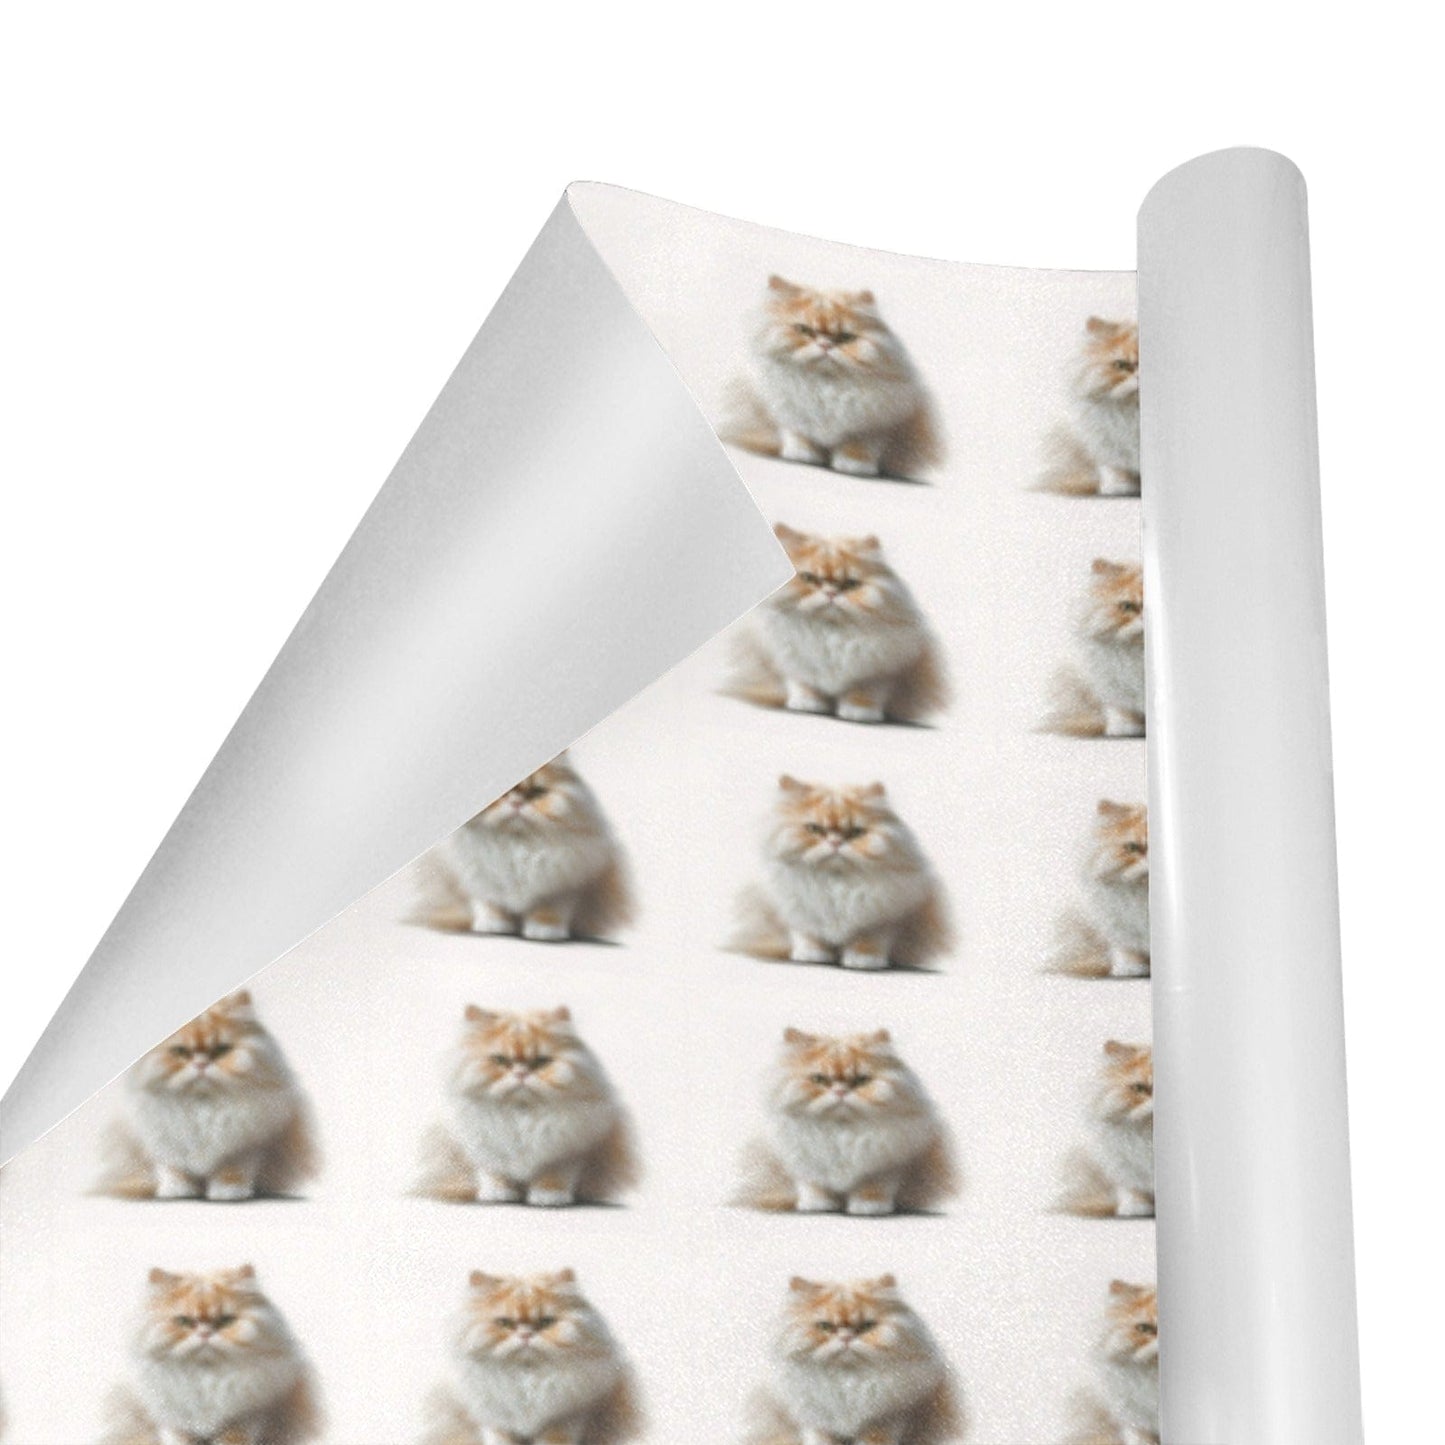 Meowsers Cat Theme Gift Wrapping Paper Roll Gift Wrapping Paper Pioneer Kitty Market   